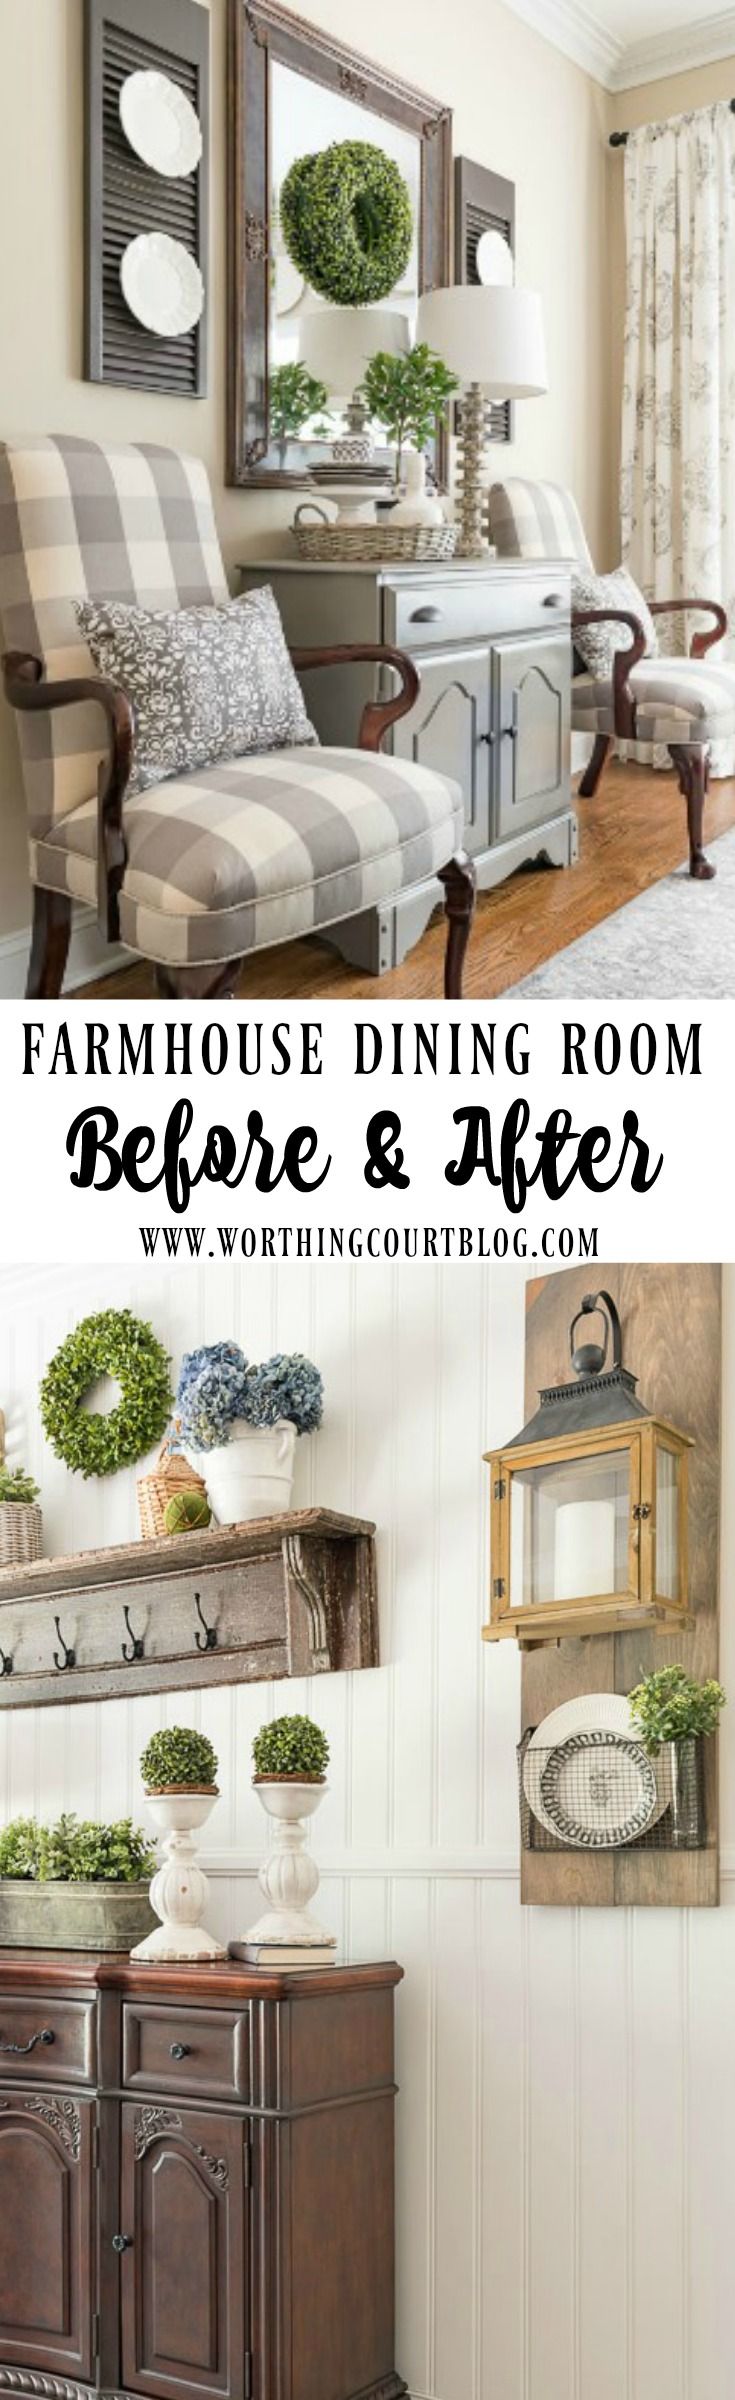 Farmhouse Dining Room Makeover Reveal - Before And After